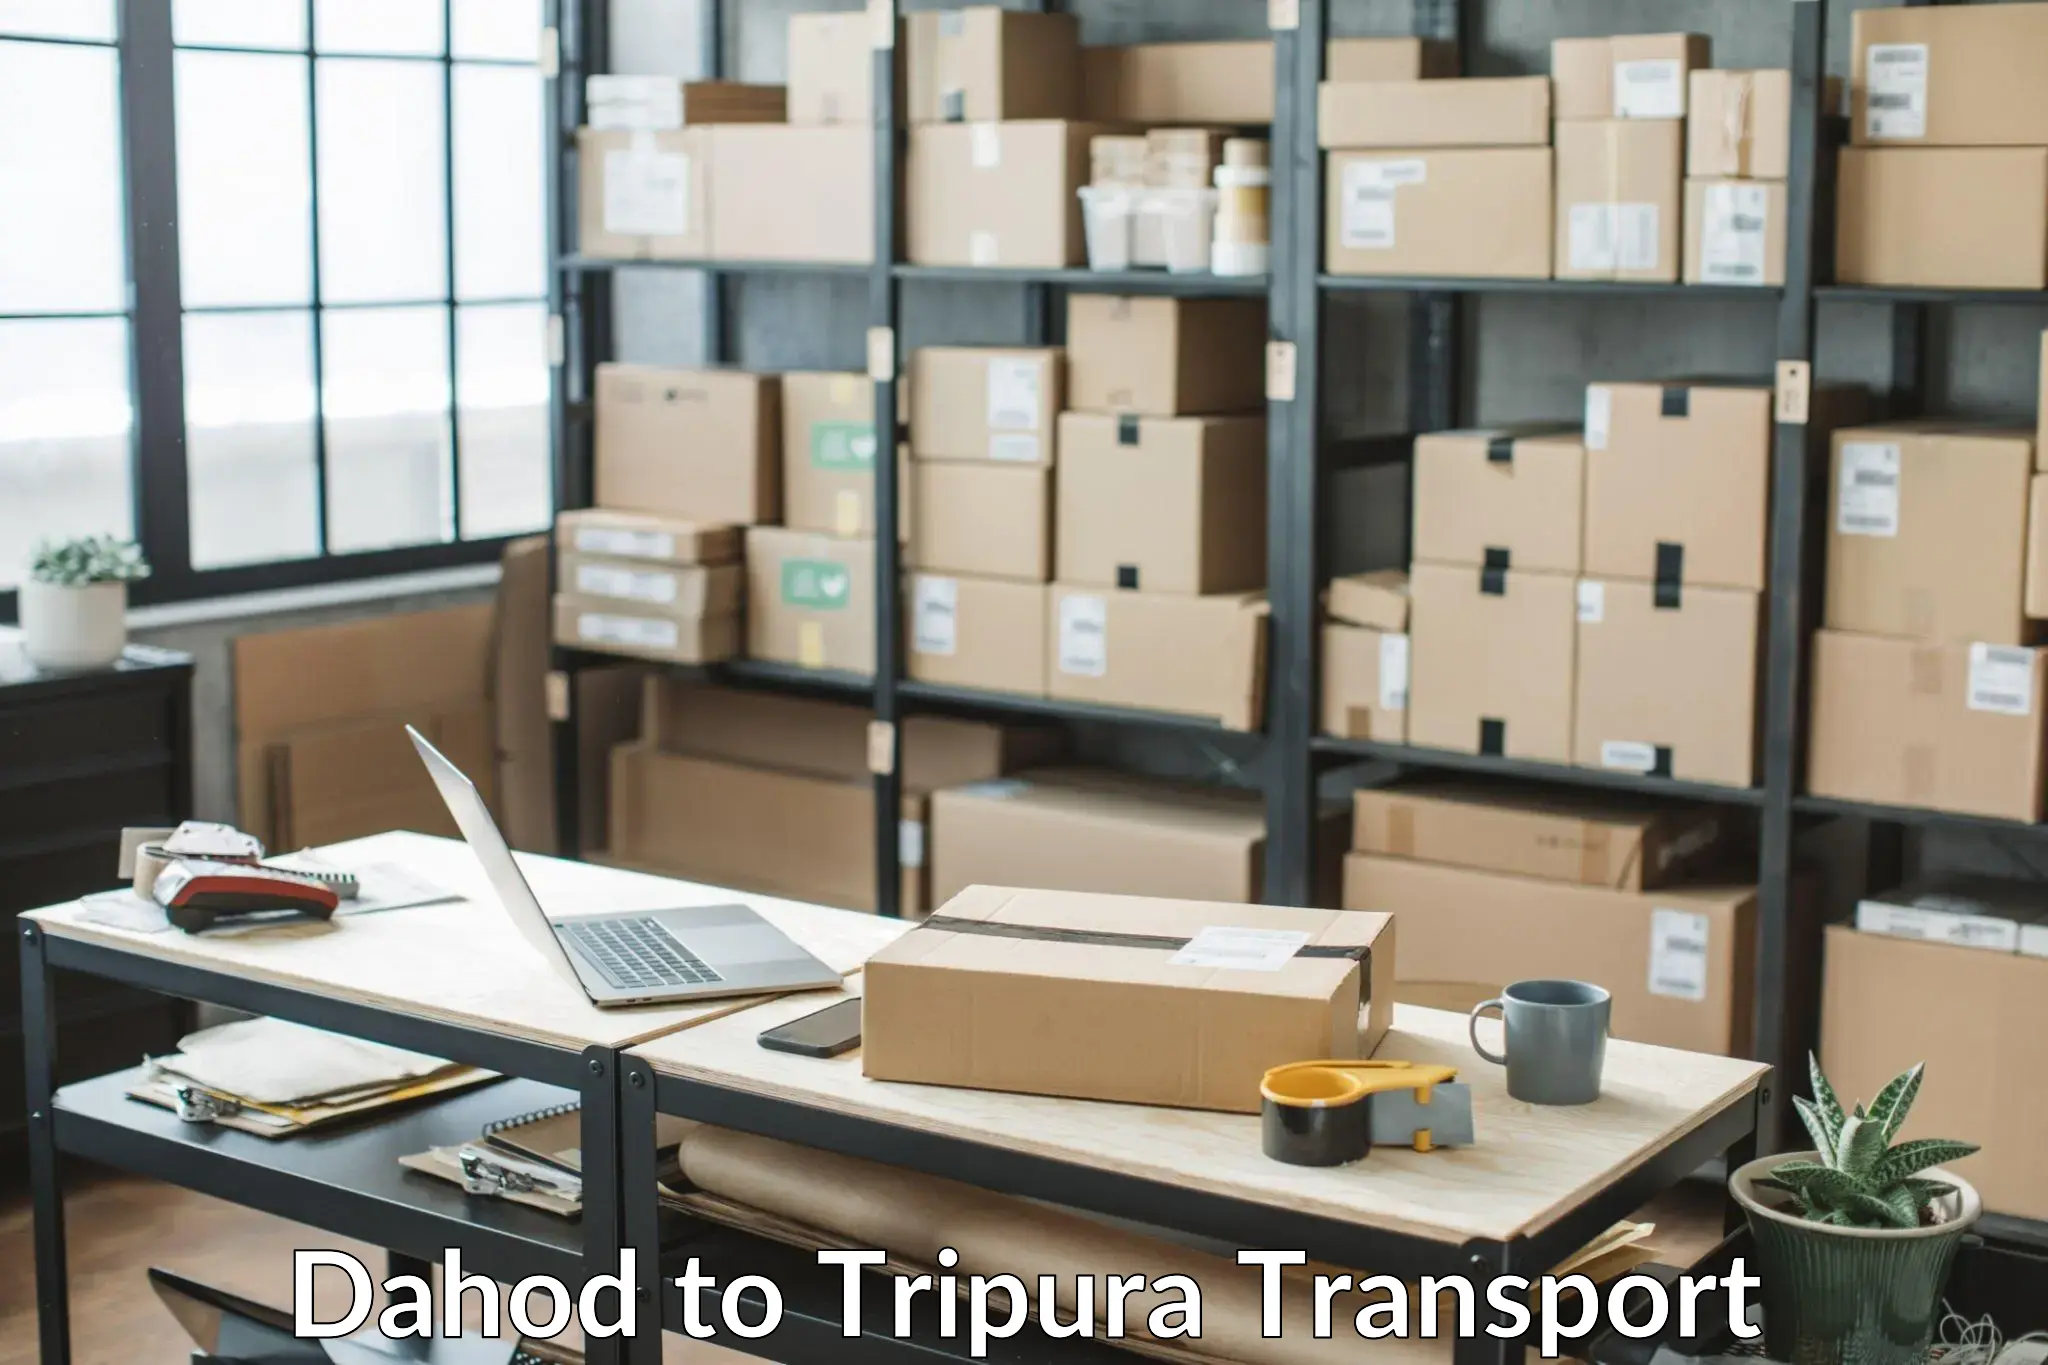 Express transport services Dahod to Udaipur Tripura